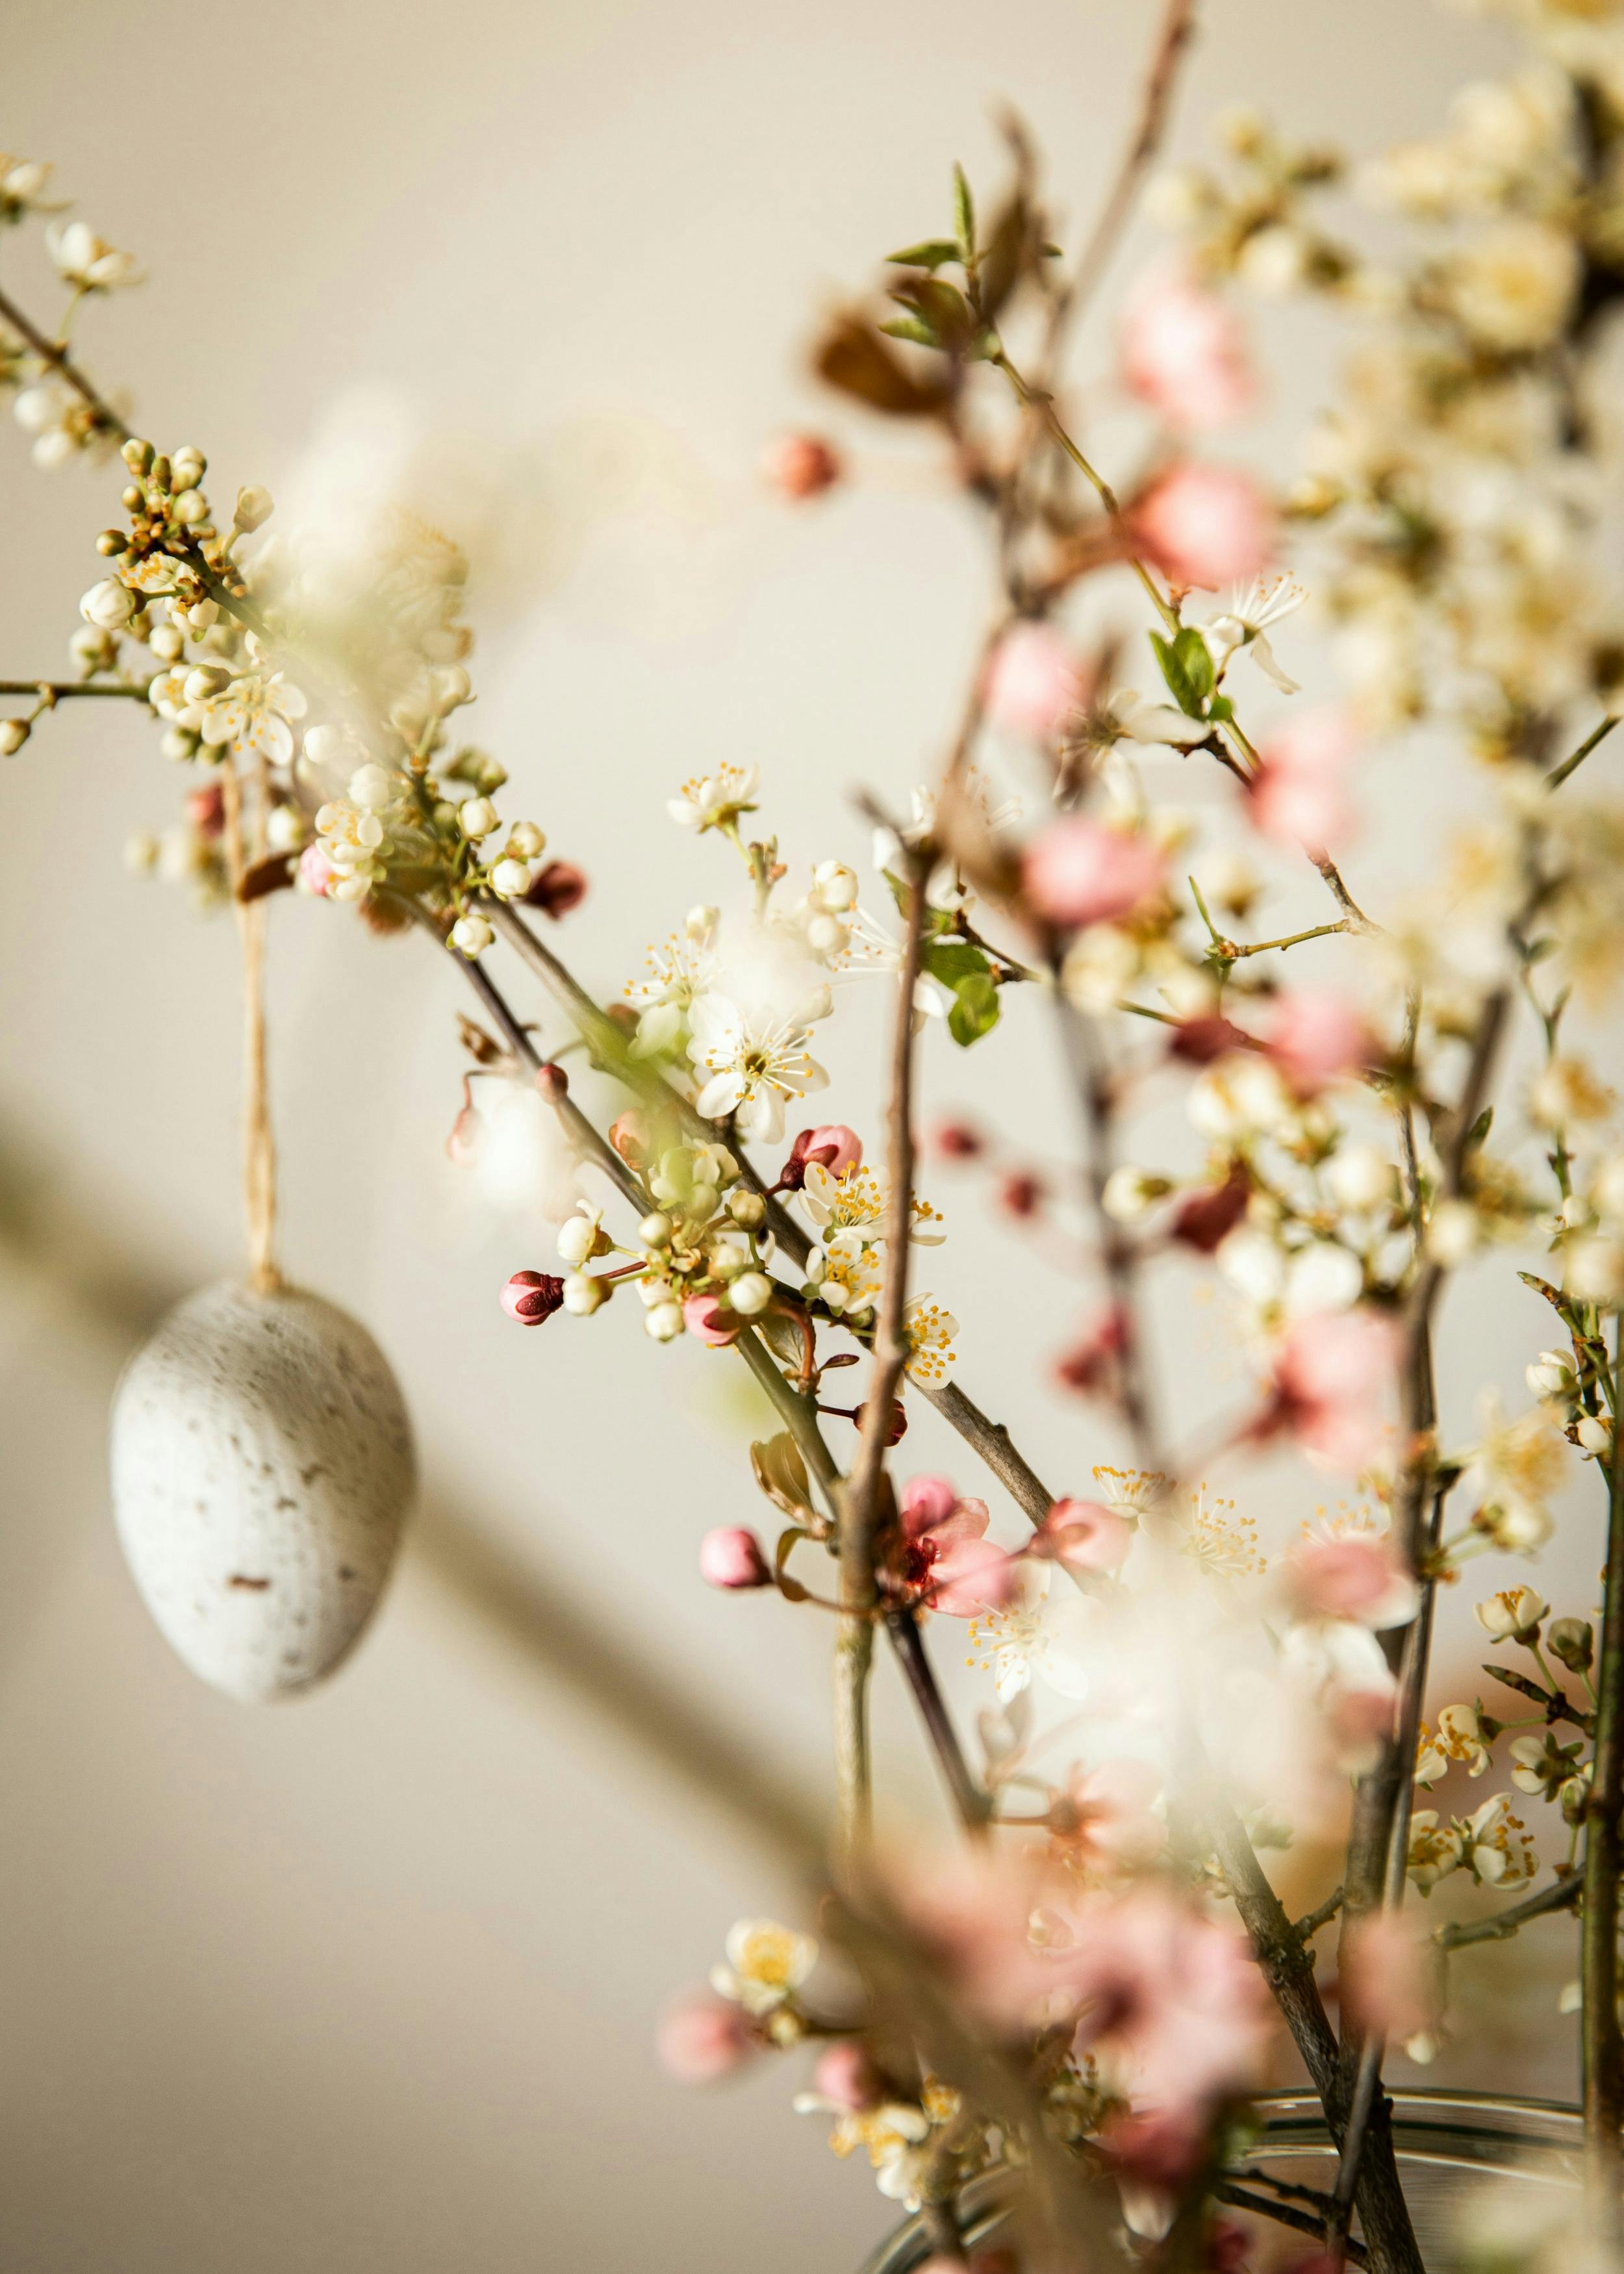 Branches of fruit plant with flowering gems with an egg hanging by a string of twine.